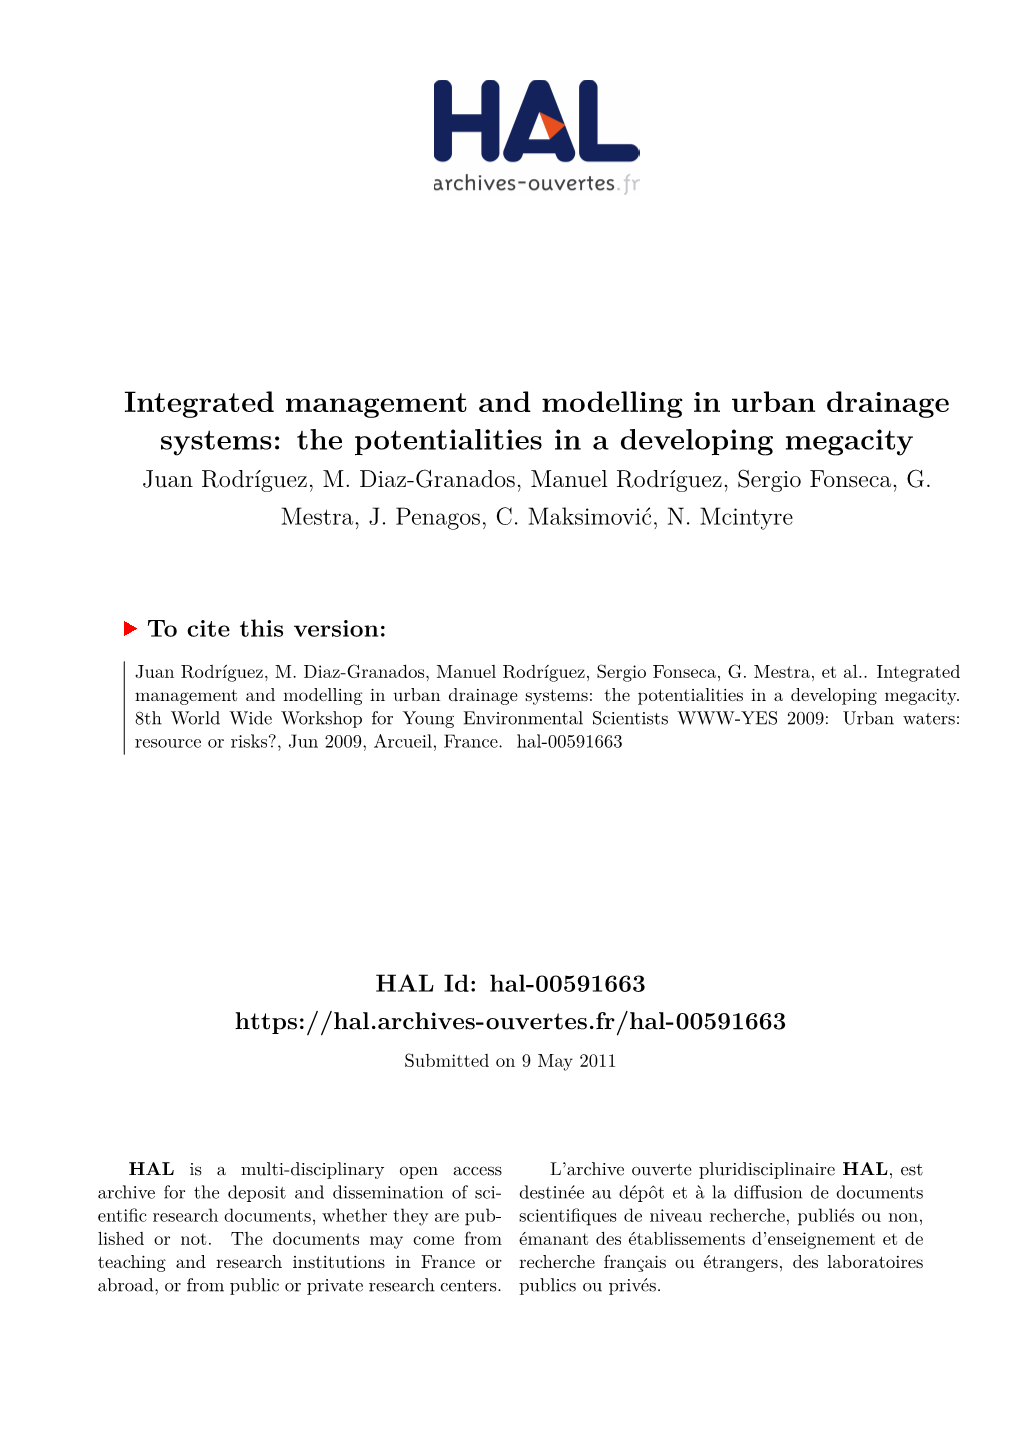 Integrated Management and Modelling in Urban Drainage Systems: the Potentialities in a Developing Megacity Juan Rodríguez, M